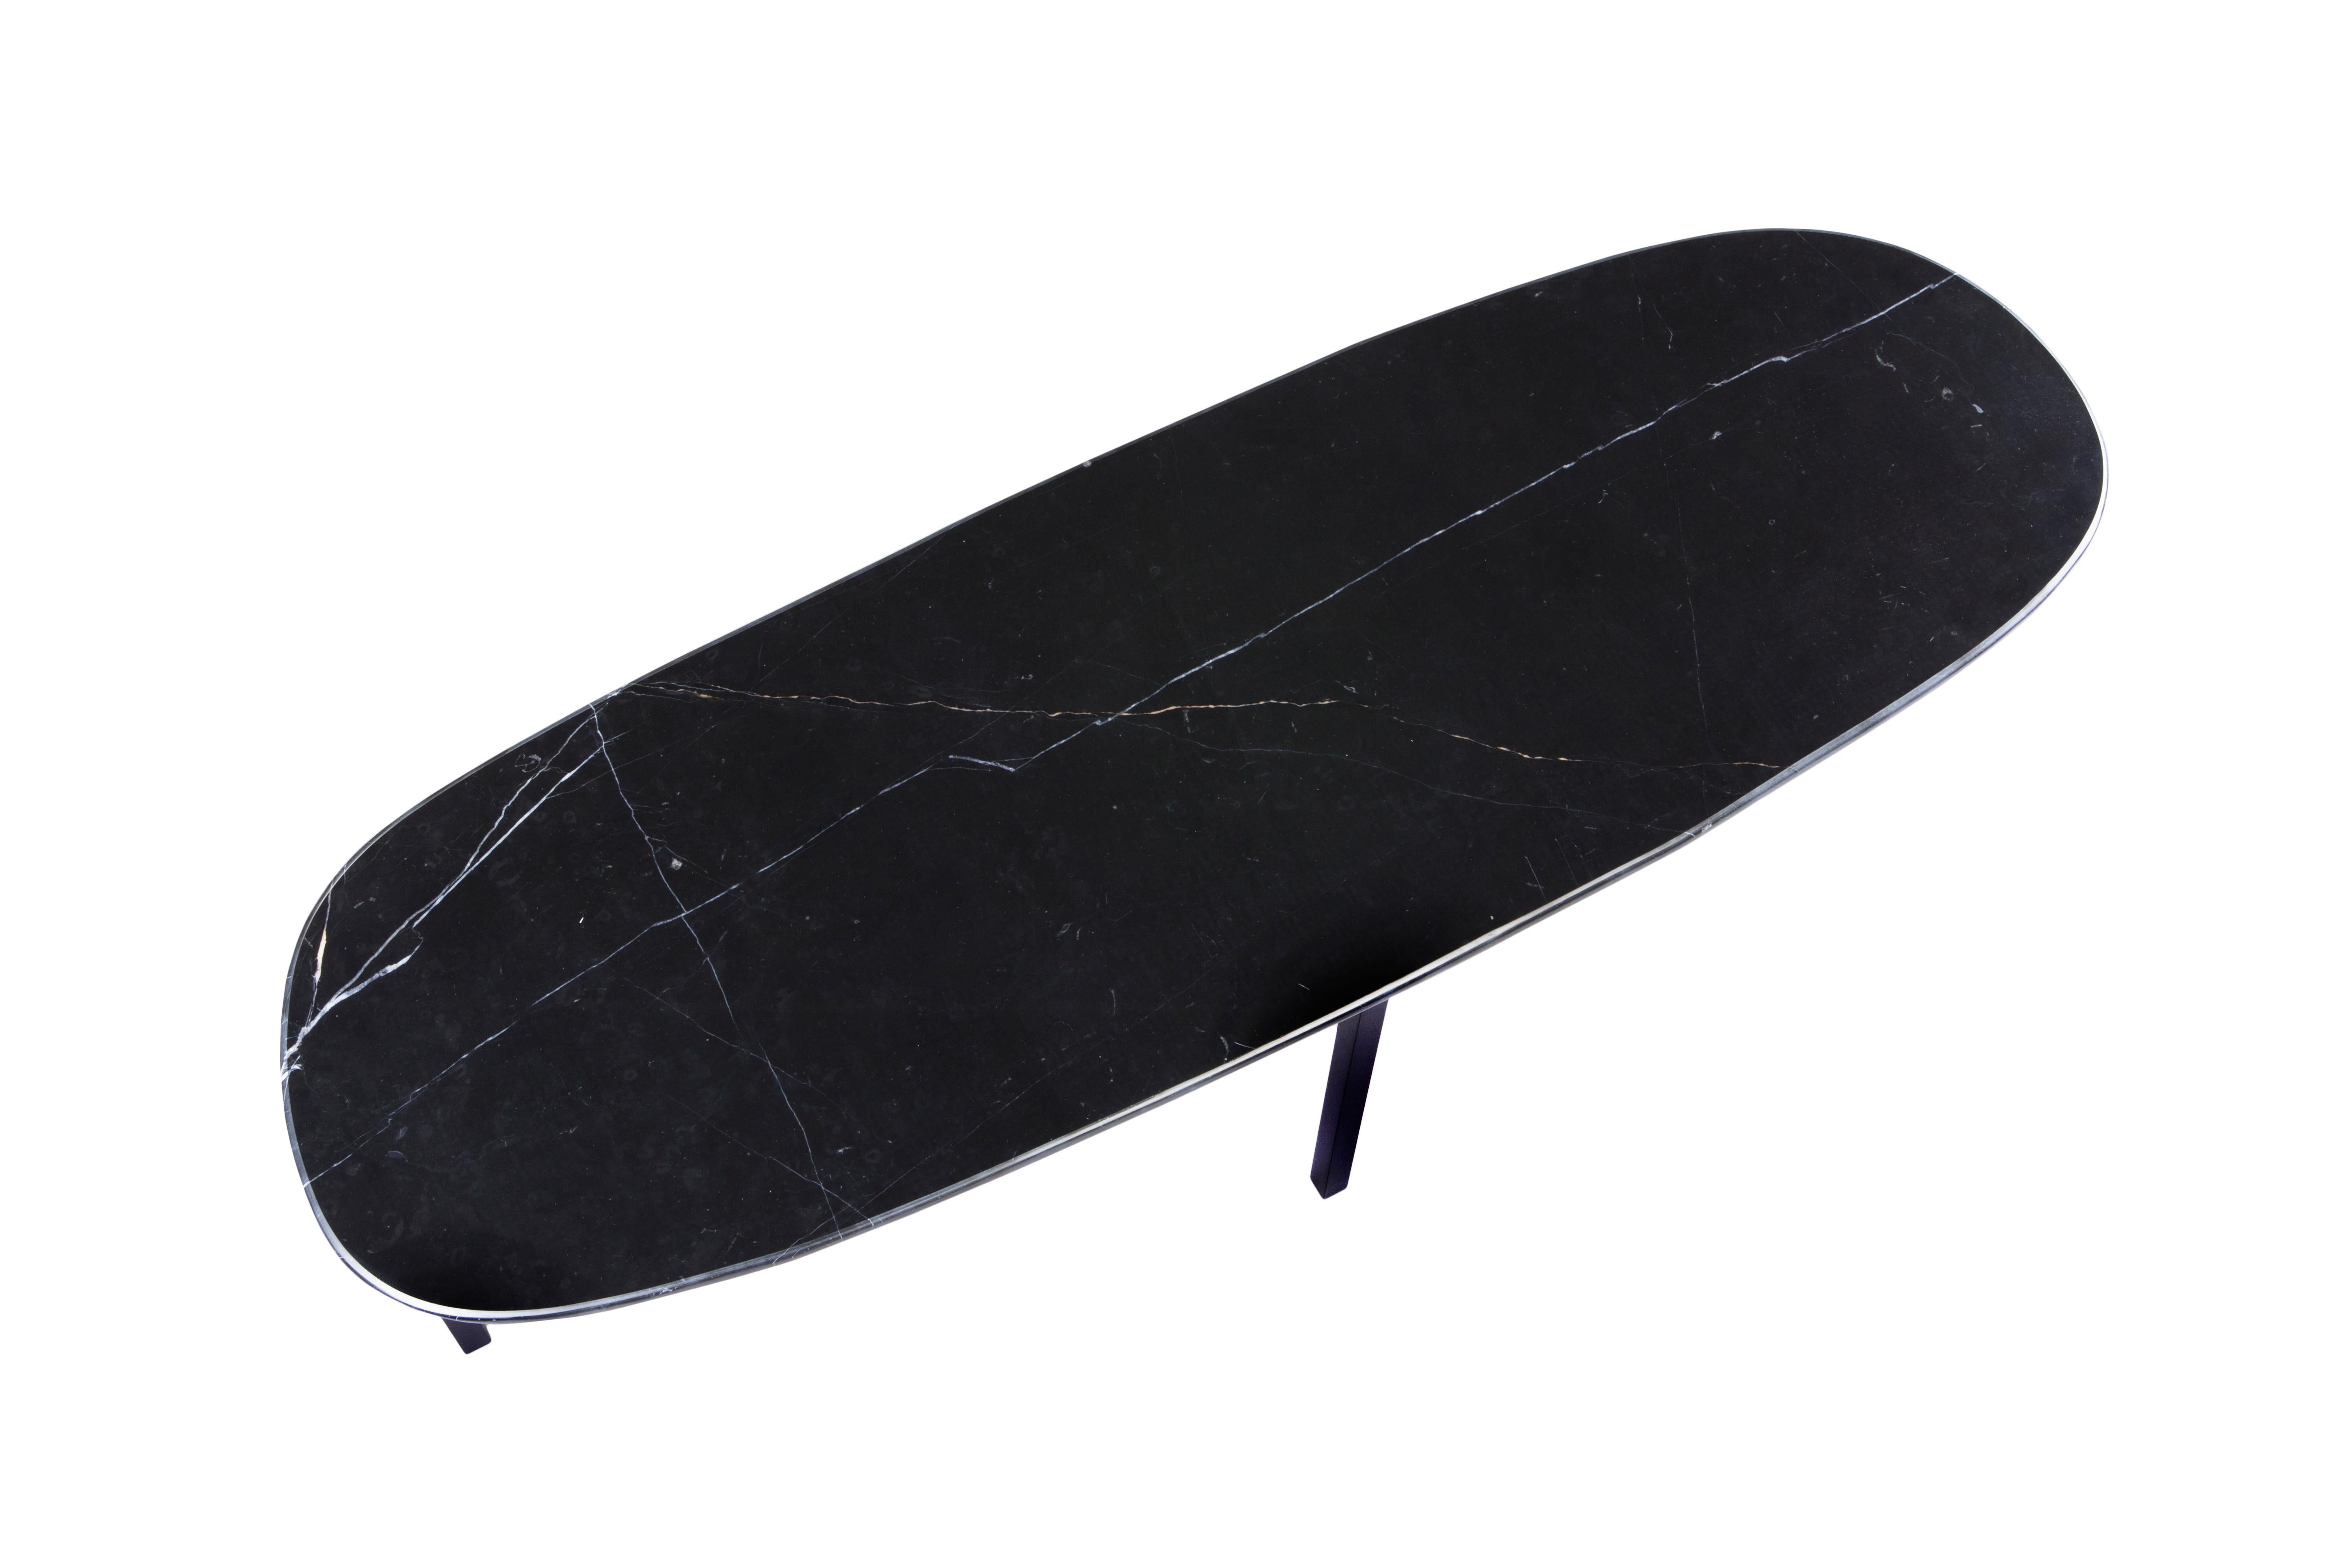 Uzun Tas coffee table by Rectangle Studio
Dimensions: W 120 x D 40 x H 43 cm 
Materials: Black marble, black paint coating on metal

Tas_Uzun Sehpa was shaped and finished by the marble table designer.
For this reason, each table has different